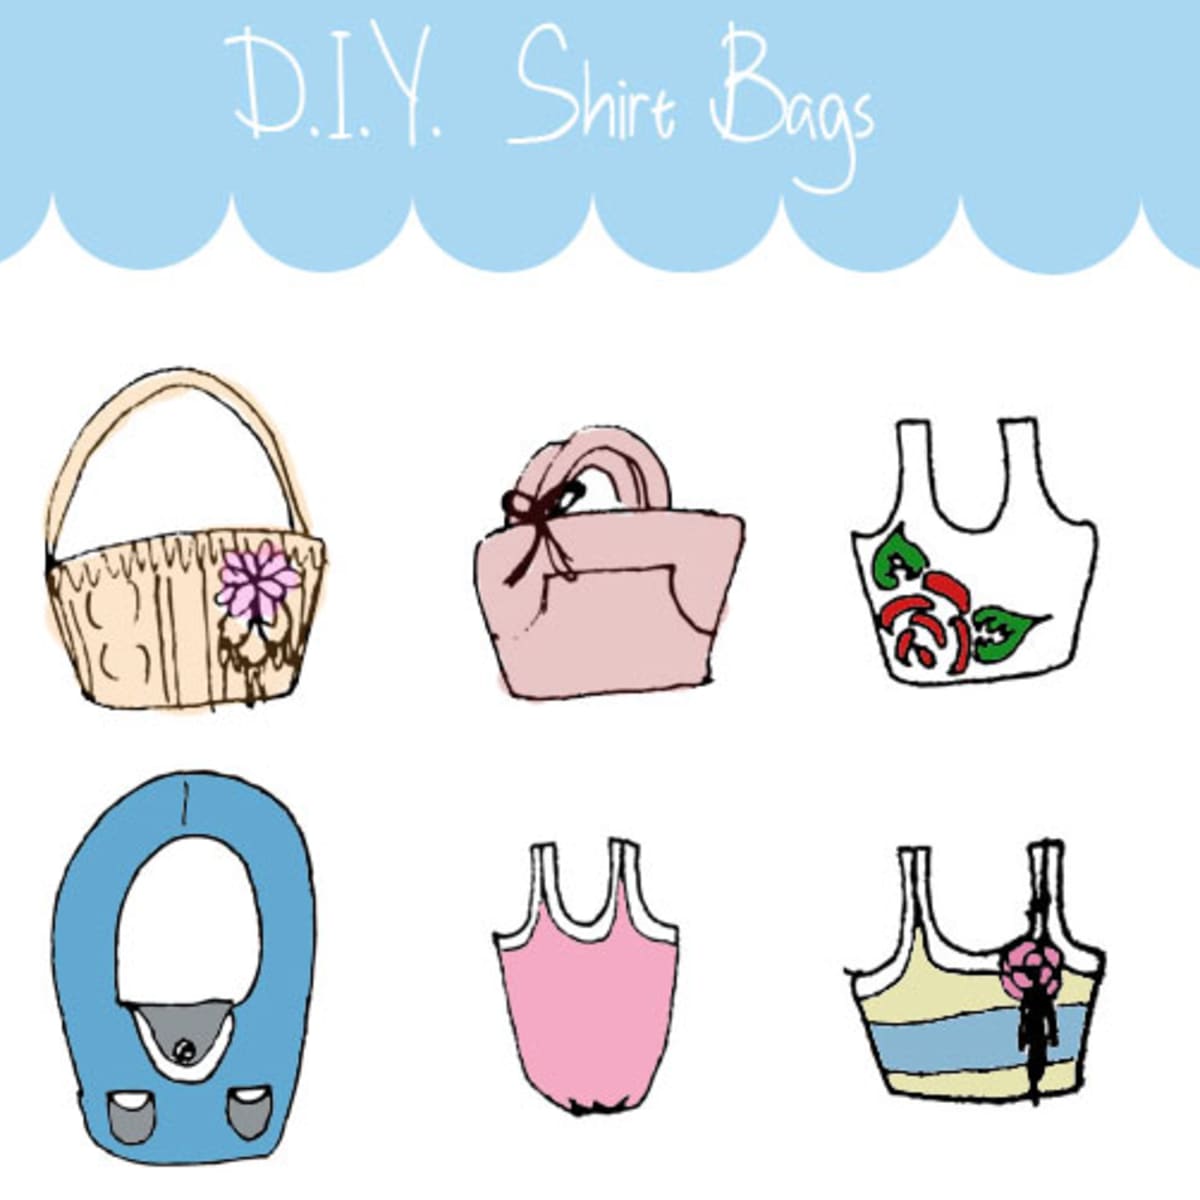 14 Ways to Revamp Your Old Bags